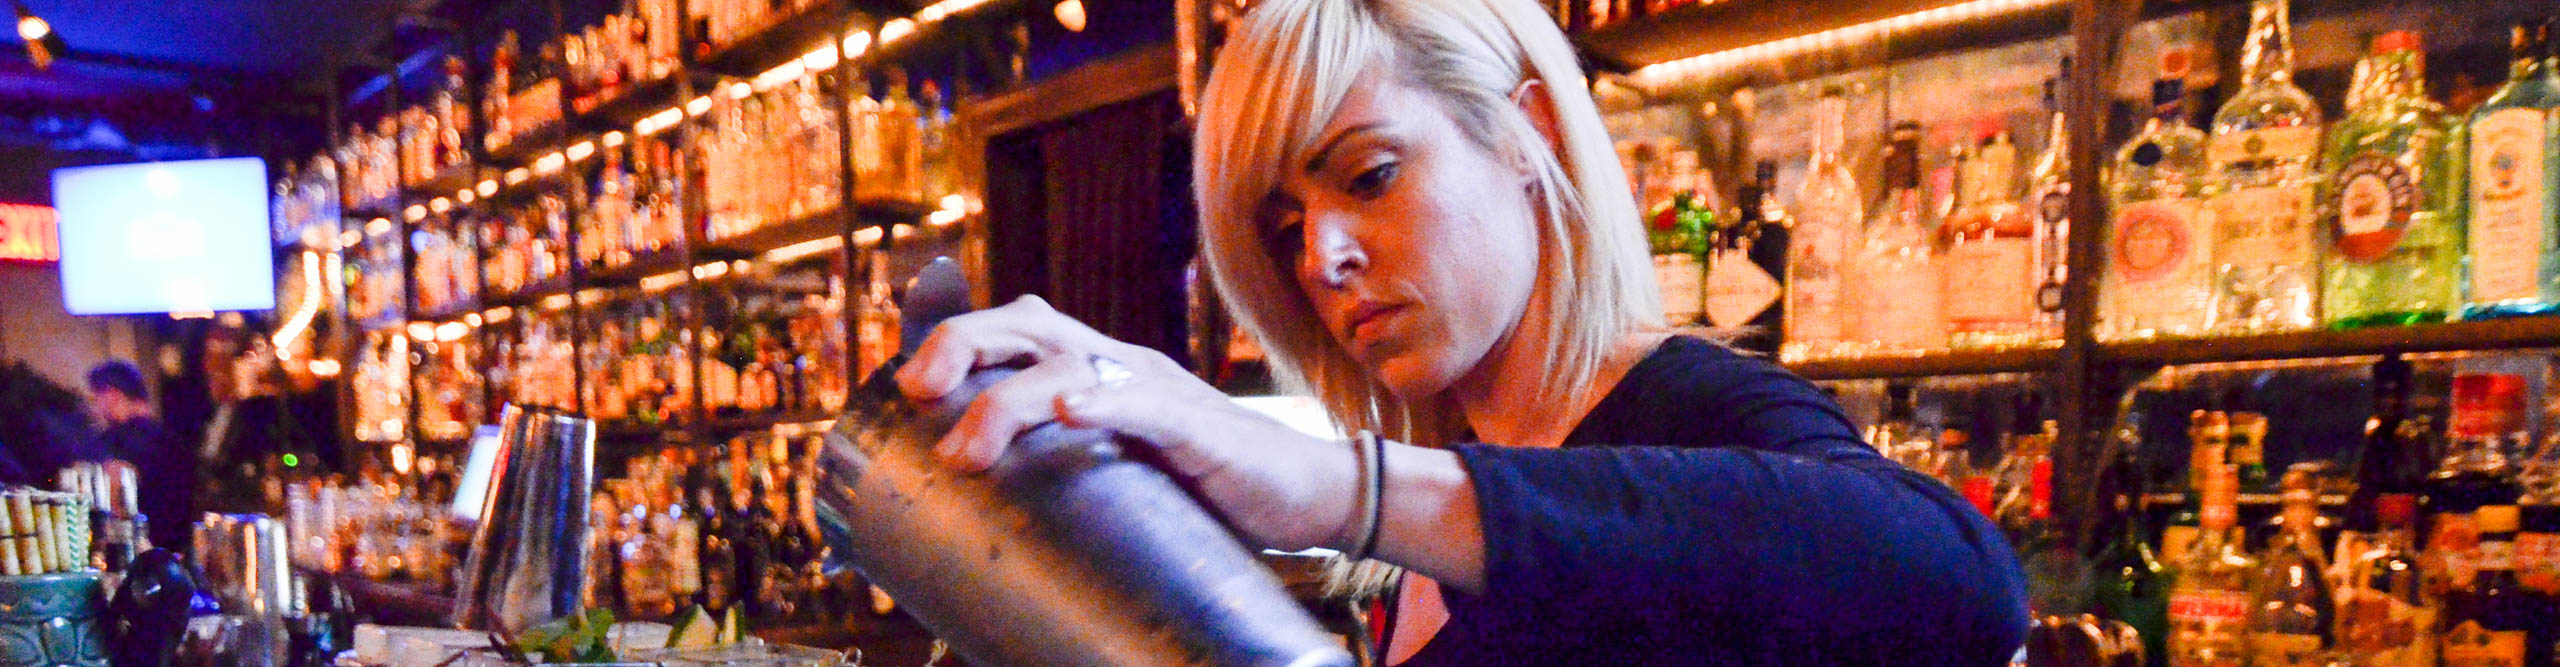 Bartender pouring a drink in a bar in New York,  USA